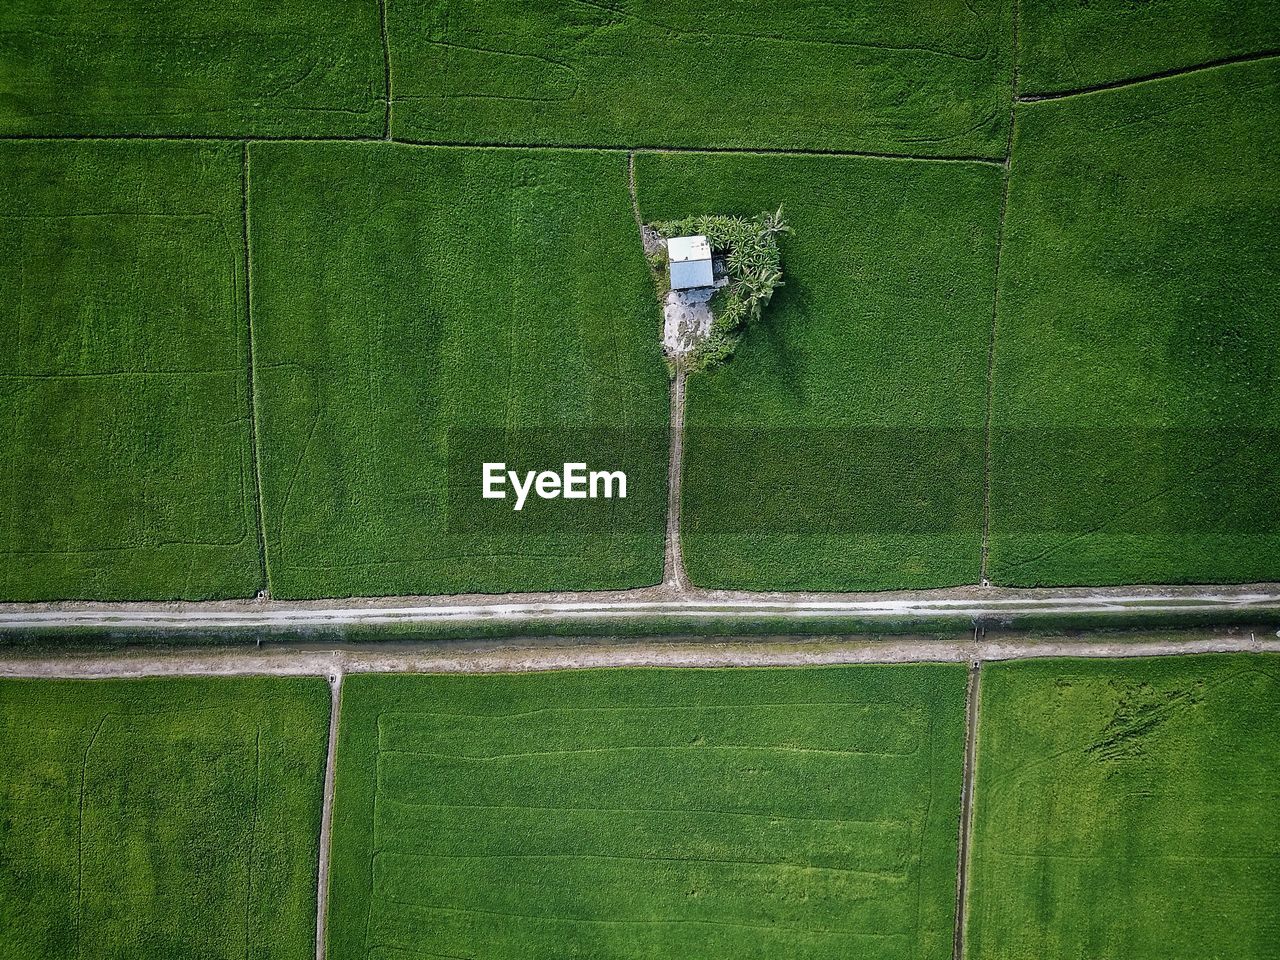 High angle view of grassy field